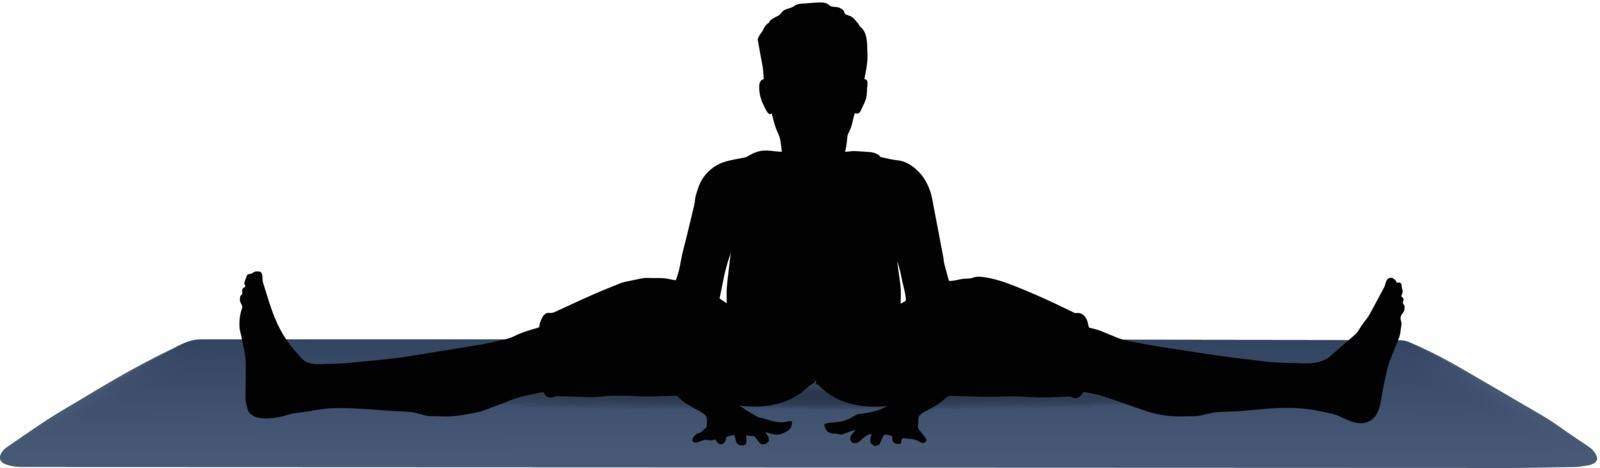 vector illustration of Yoga positions in Wide Angle Bend pose by Istanbul2009